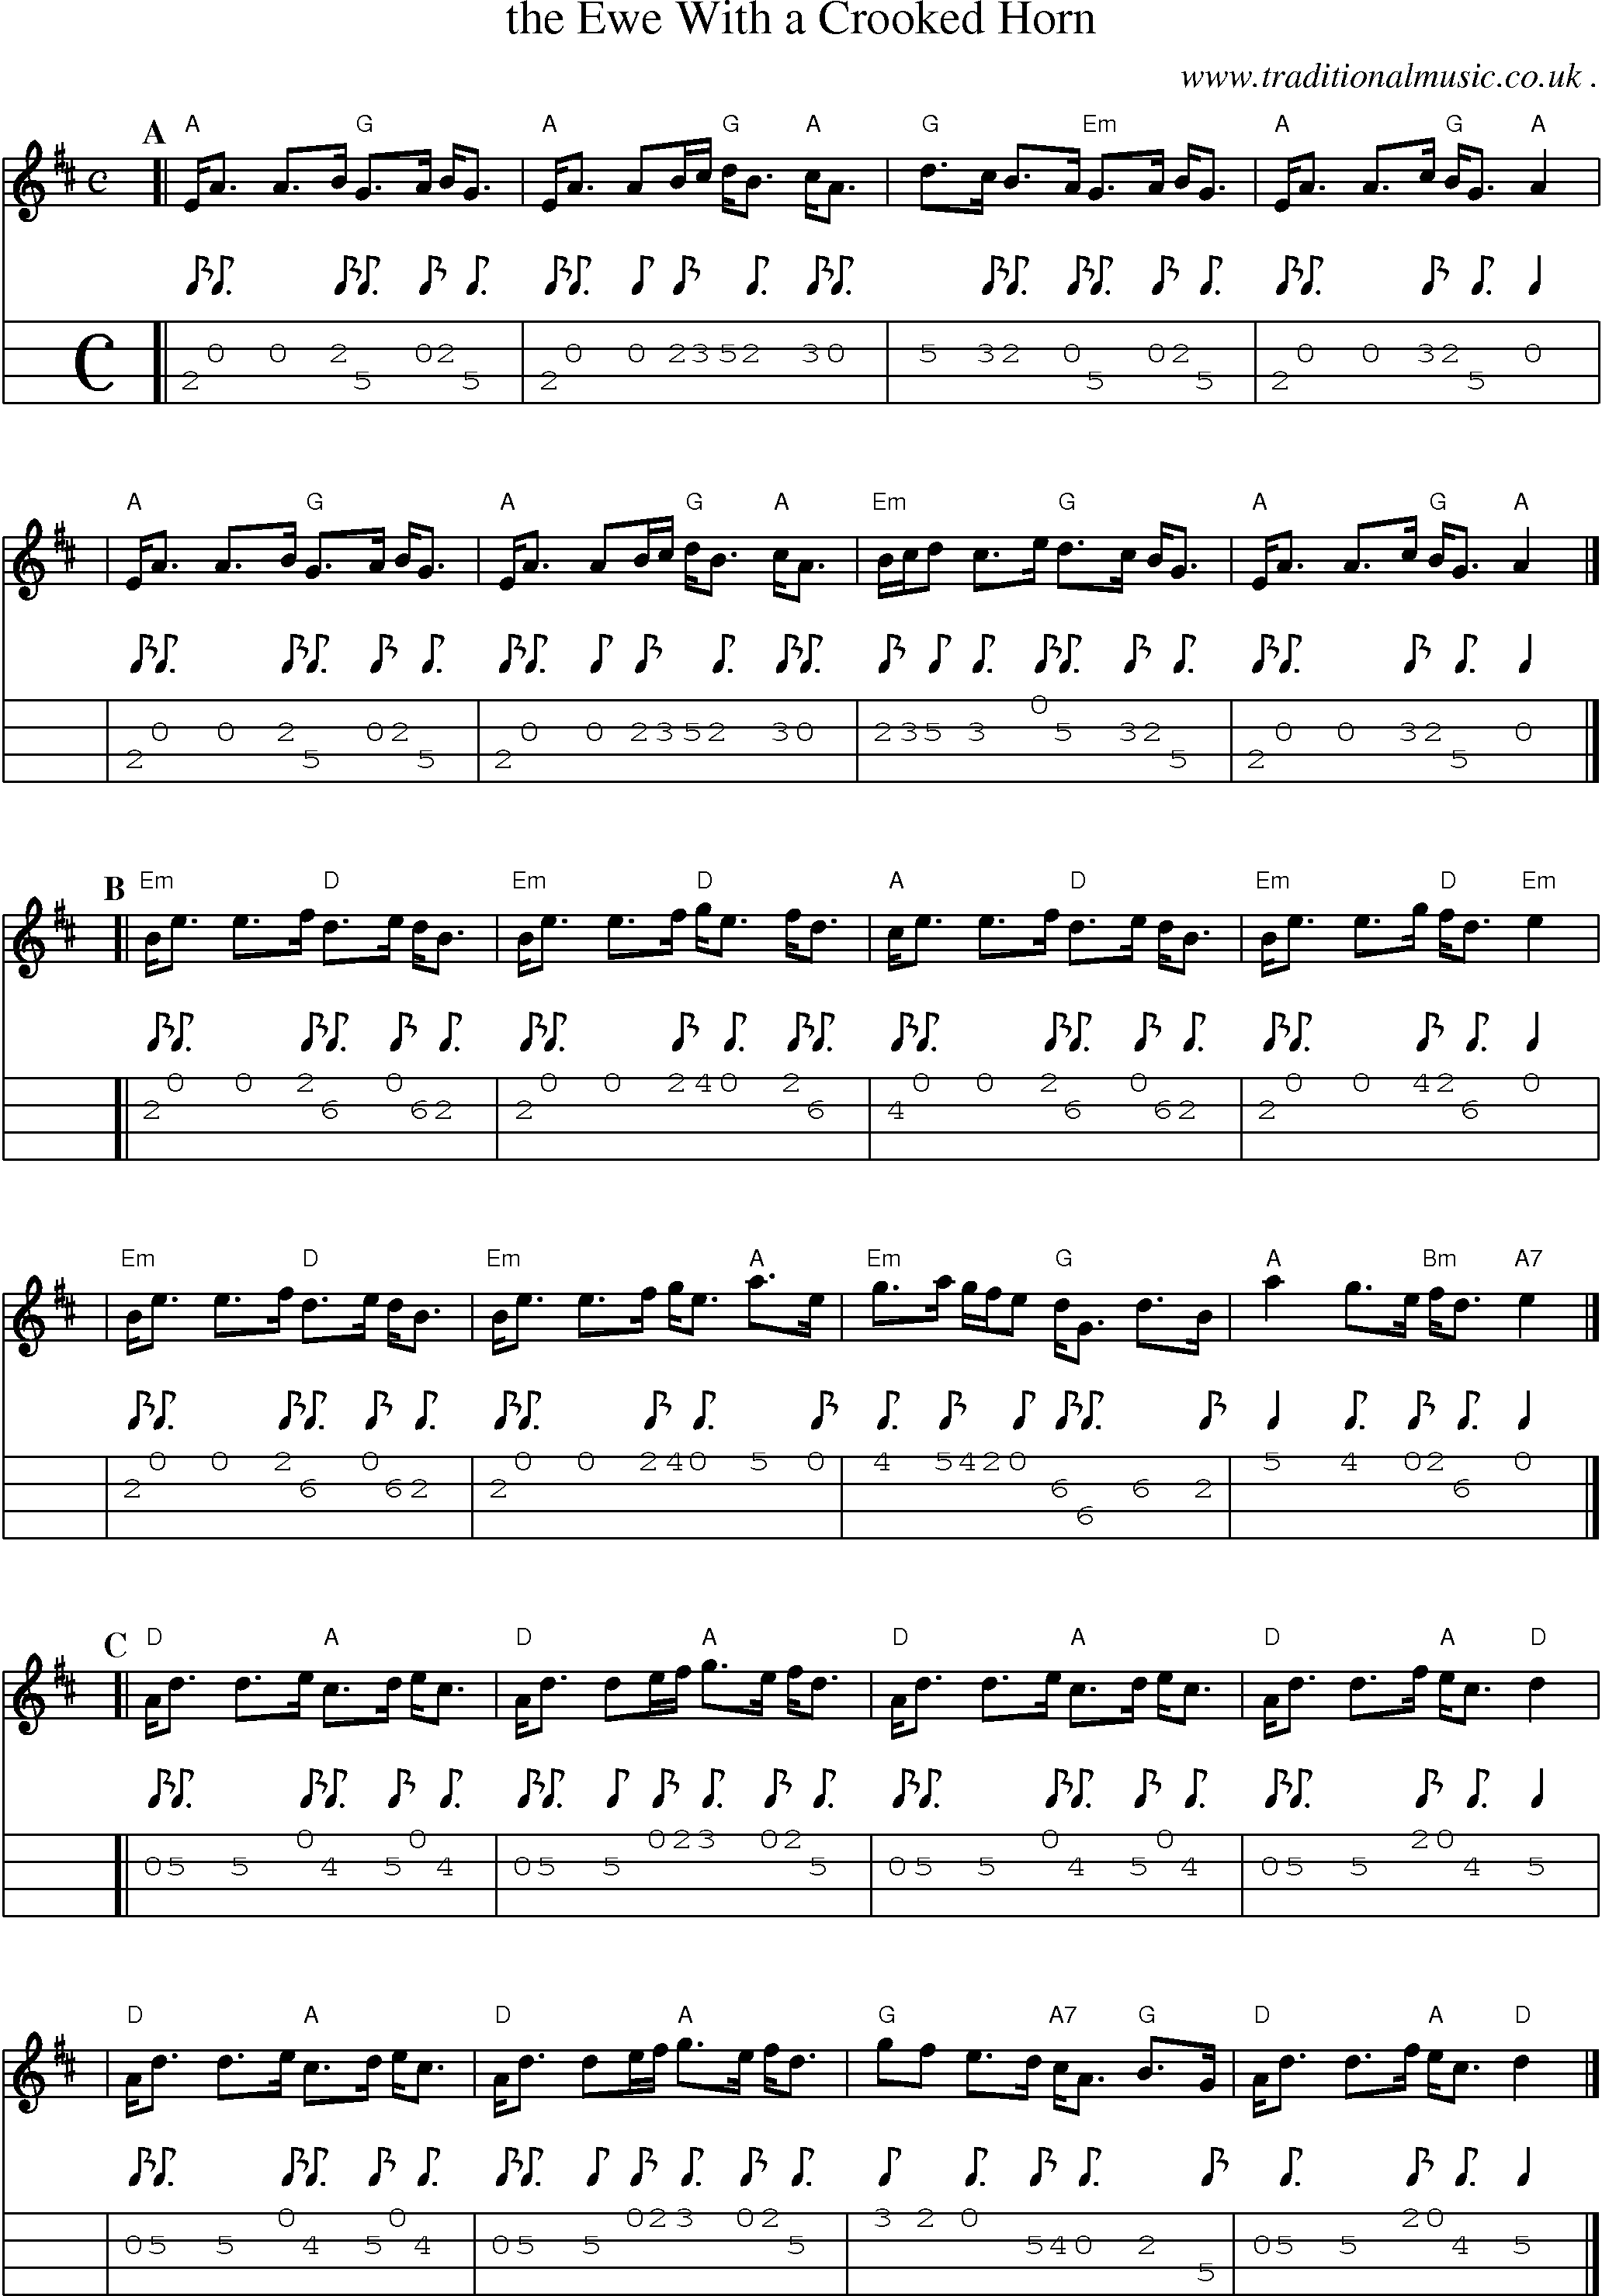 Sheet-music  score, Chords and Mandolin Tabs for The Ewe With A Crooked Horn